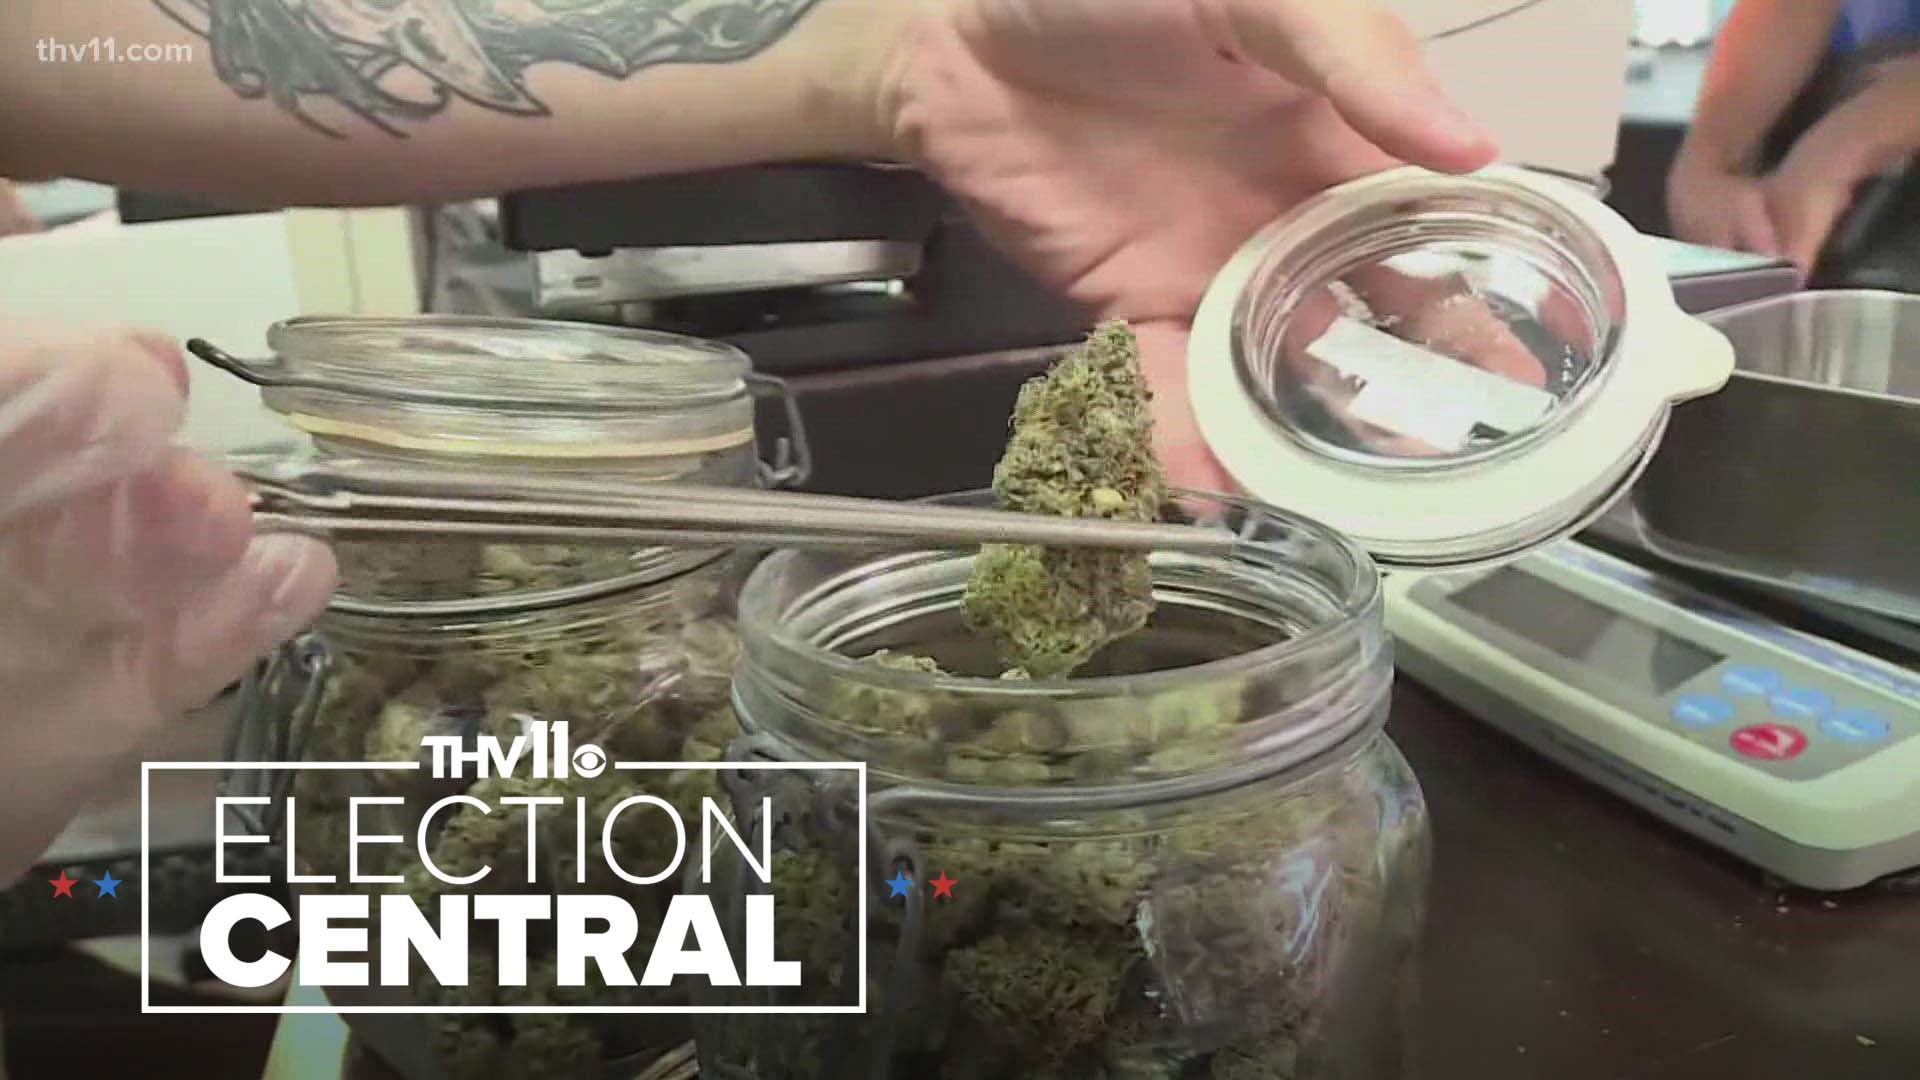 We're taking a look at Issue 4 on the ballot and learning that if passed, it would legalize the recreational use and commercial sale of marijuana to those 21+.